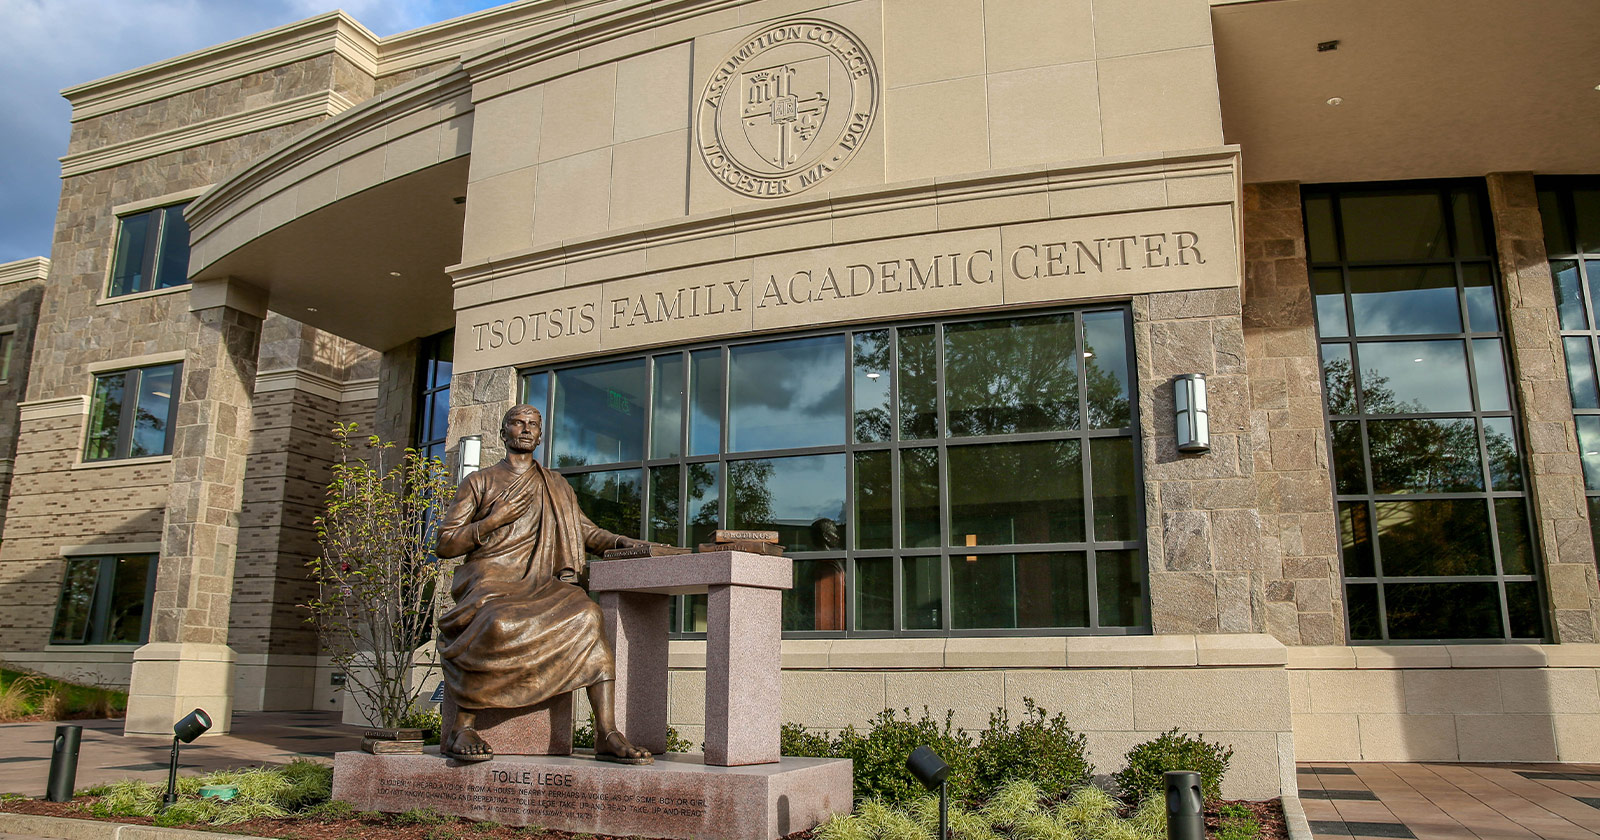 A photo of the statue of St. Augustine outside the Tsotsis Family Academic Center at Assumption University.